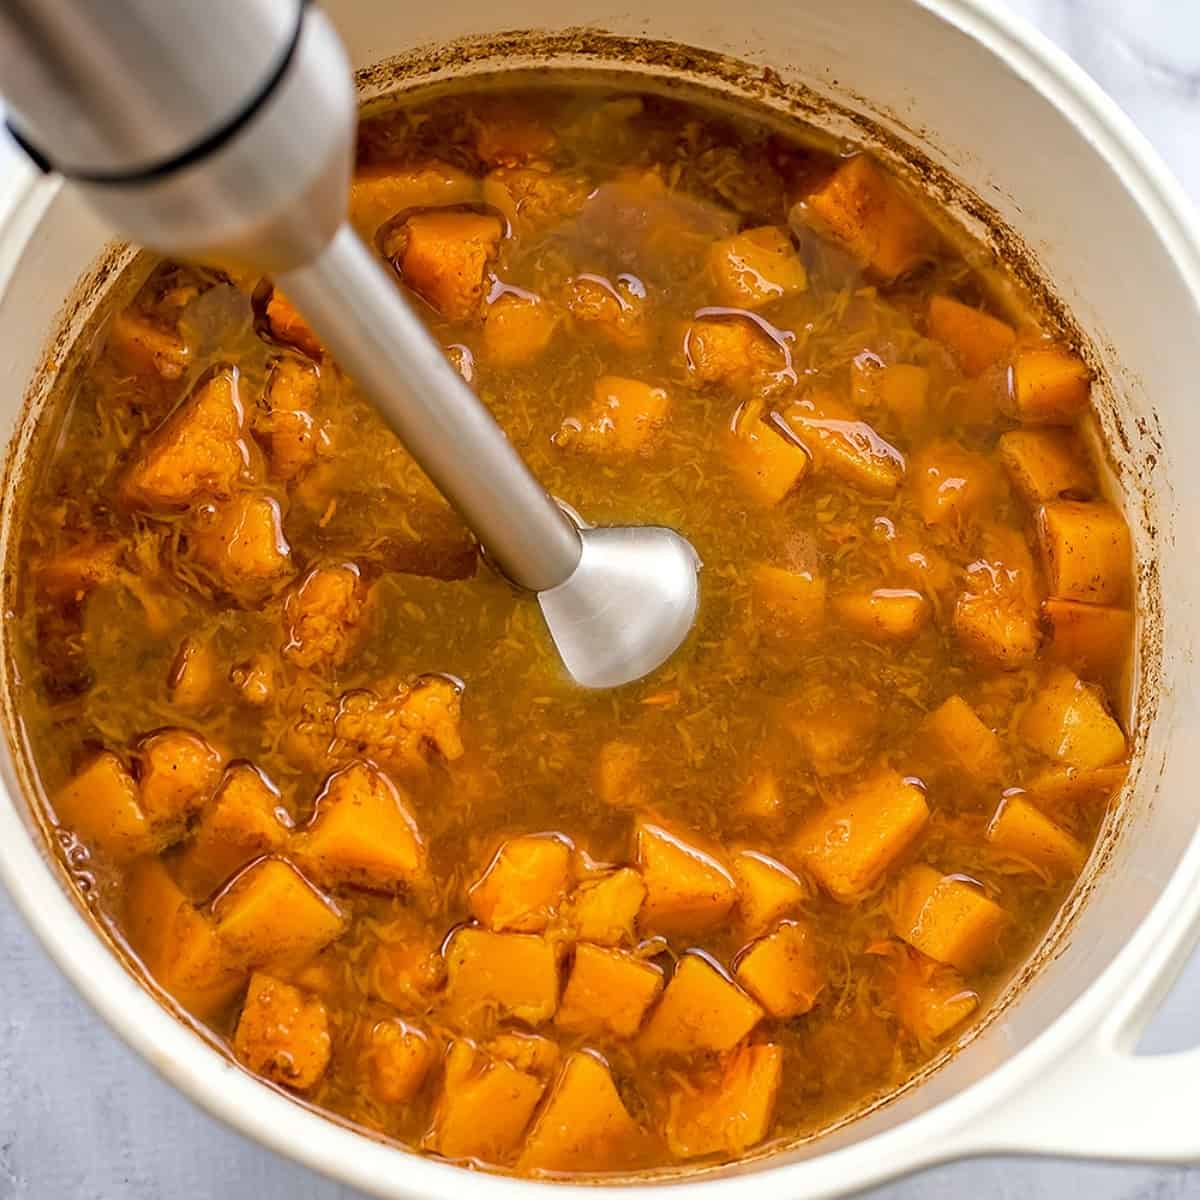 Whole30 Butternut Squash Soup - 4 Ingredients | Bites of Wellness